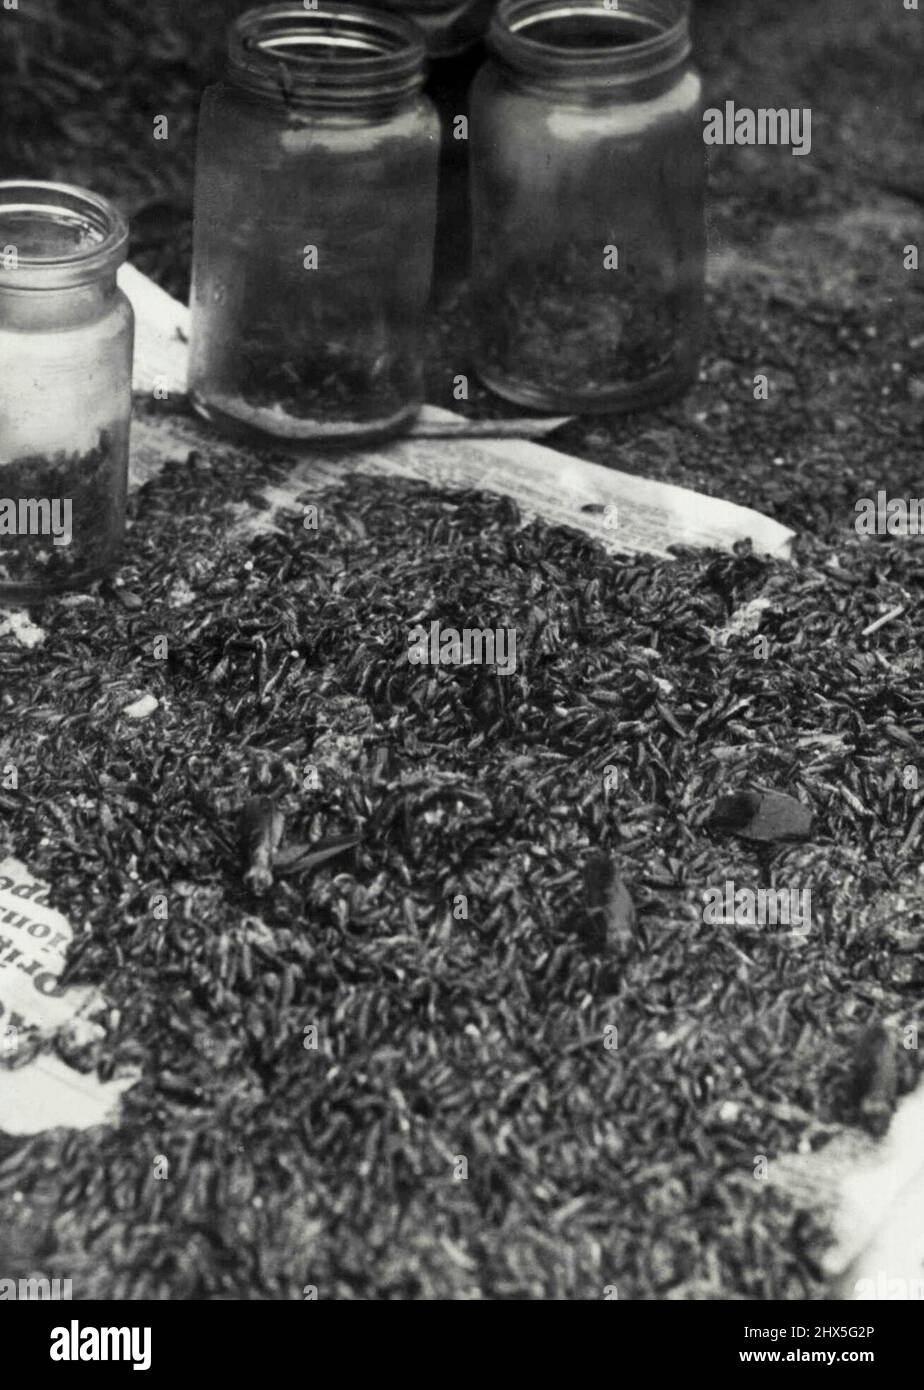 Nocturnal: Here is- one night's haul of cockroaches from the home of Mr. A. Wills, at Boundary-street, Croydon, one of those invaded by millions of the pest, thought to breed in a nearby brick- pit. Homes in Webb and Boundary Streets are also badly affected. Residents trap the cockroaches in jars containing a bait of one part of fluoro-silicate and two parts of cocoa. May 29, 1945. Stock Photo